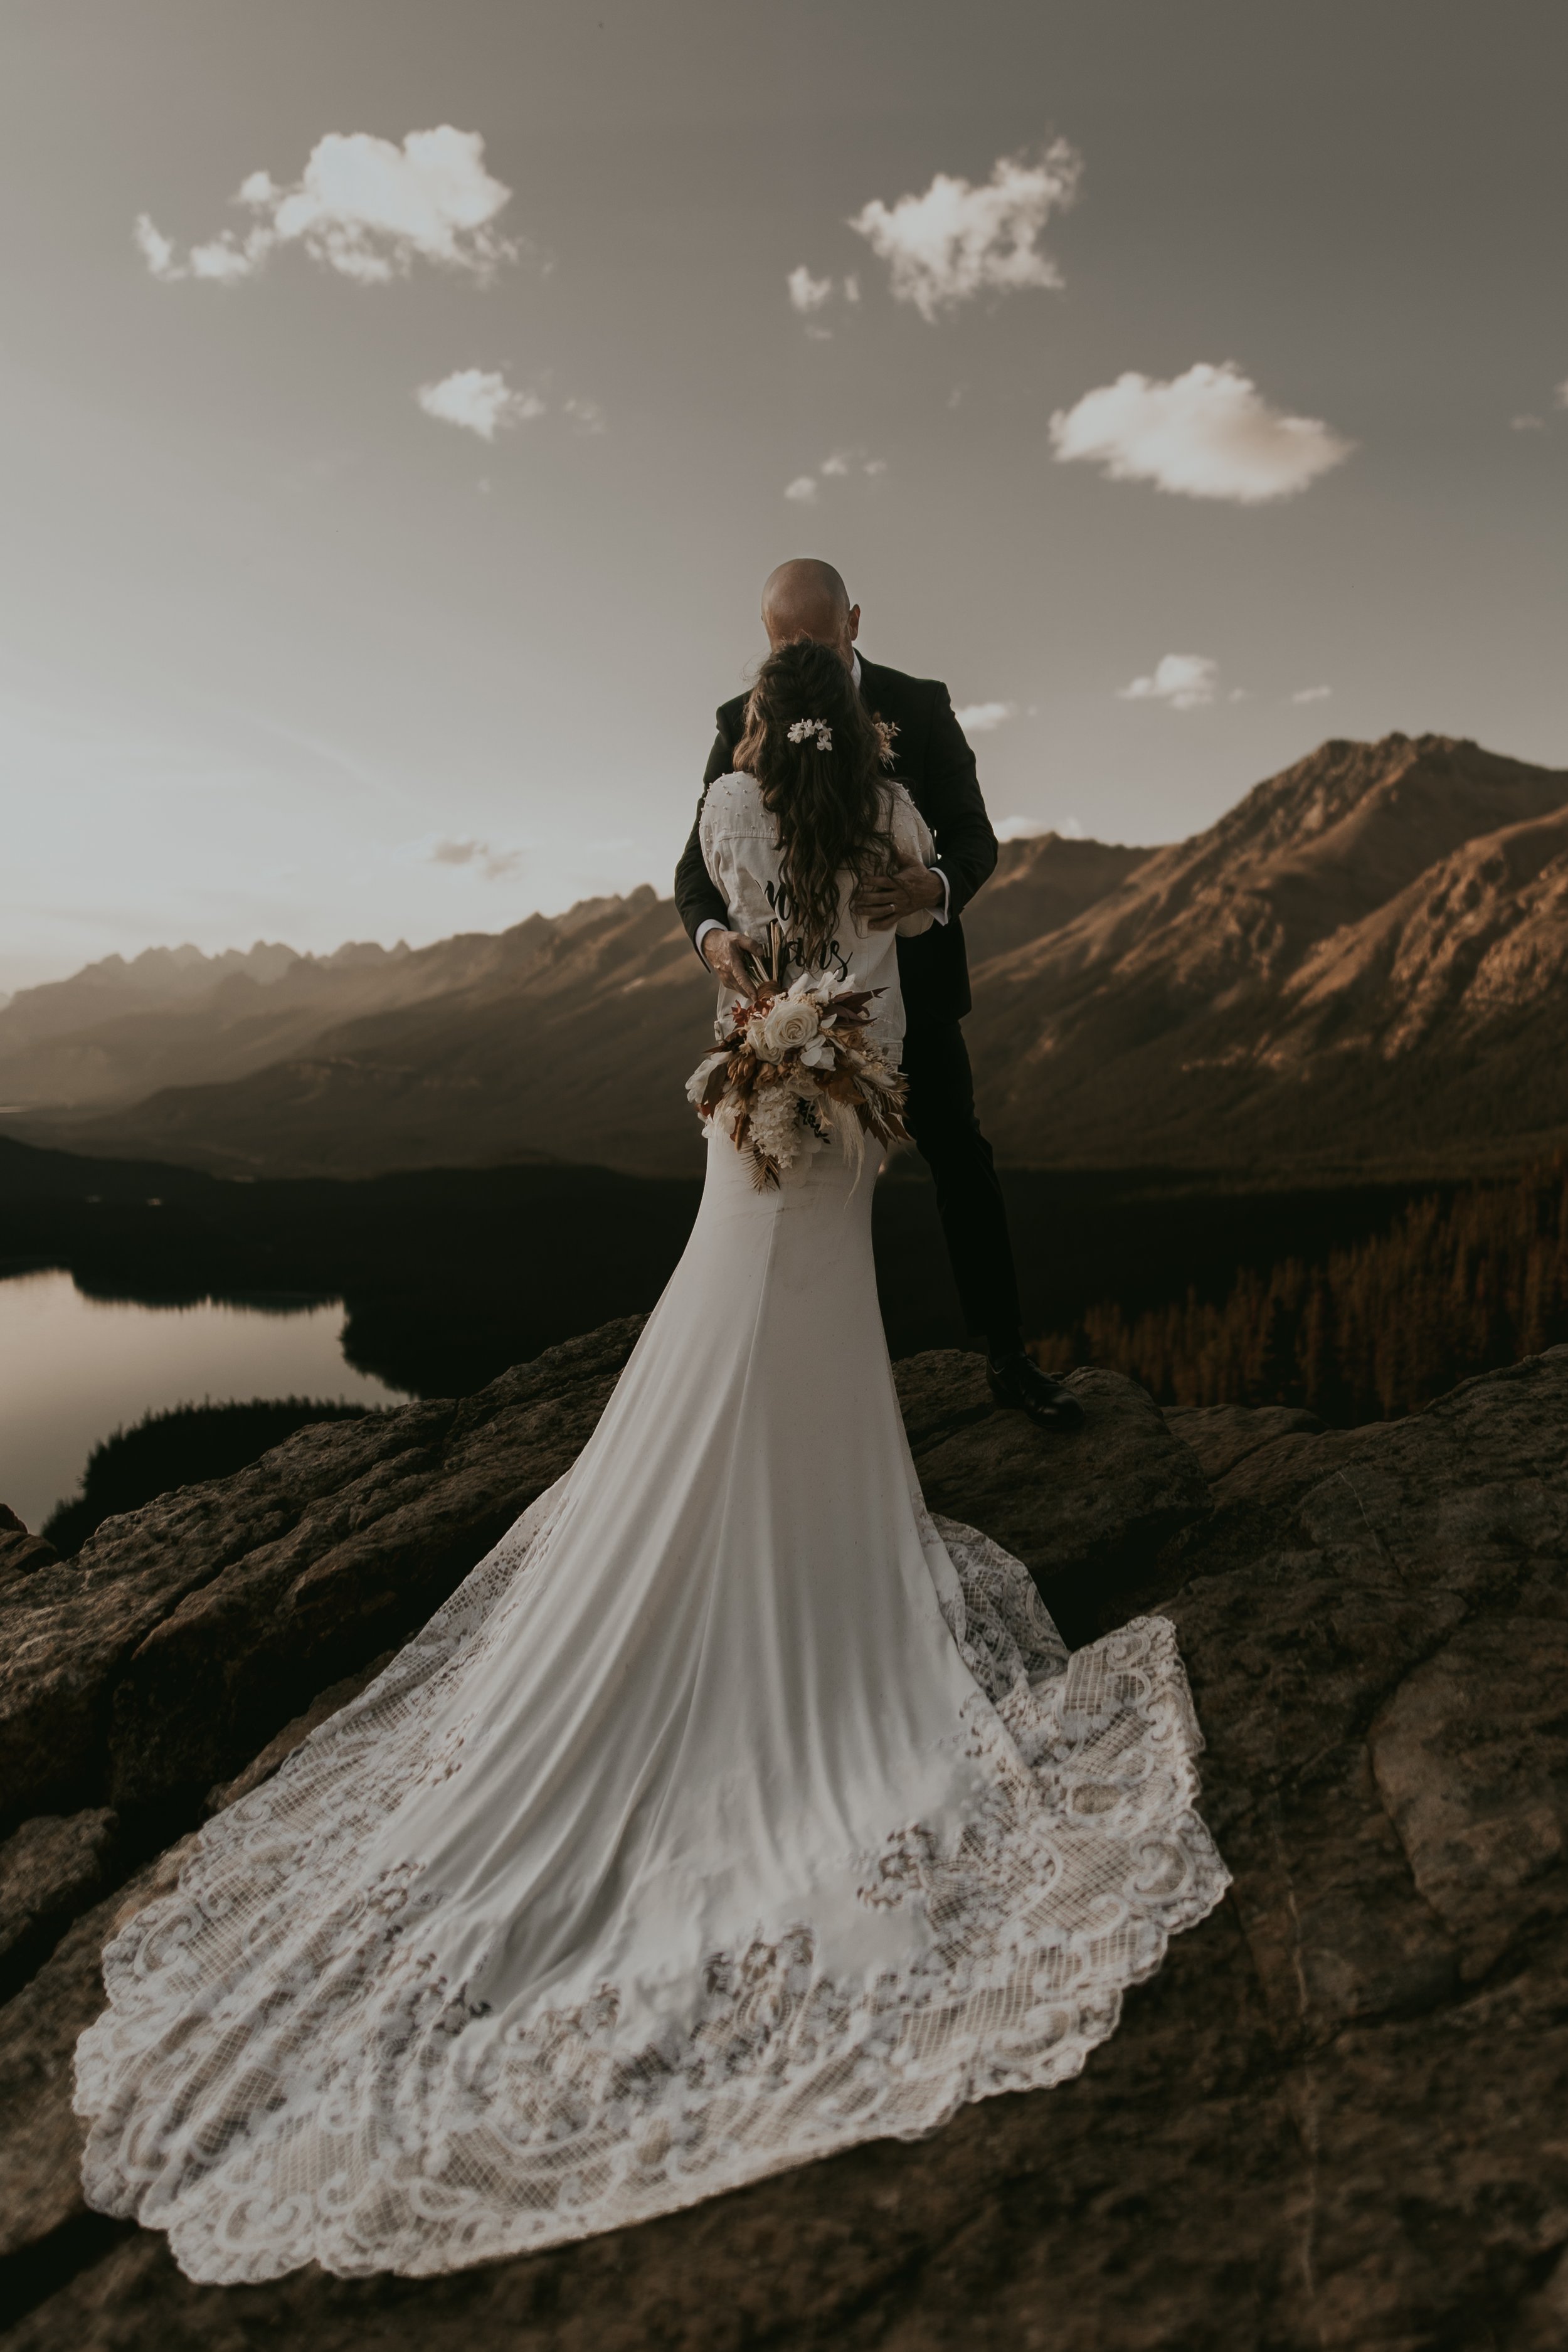 Sunset elopement ceremony in the caladian rockies. Looking over Peyto Lake In Canada